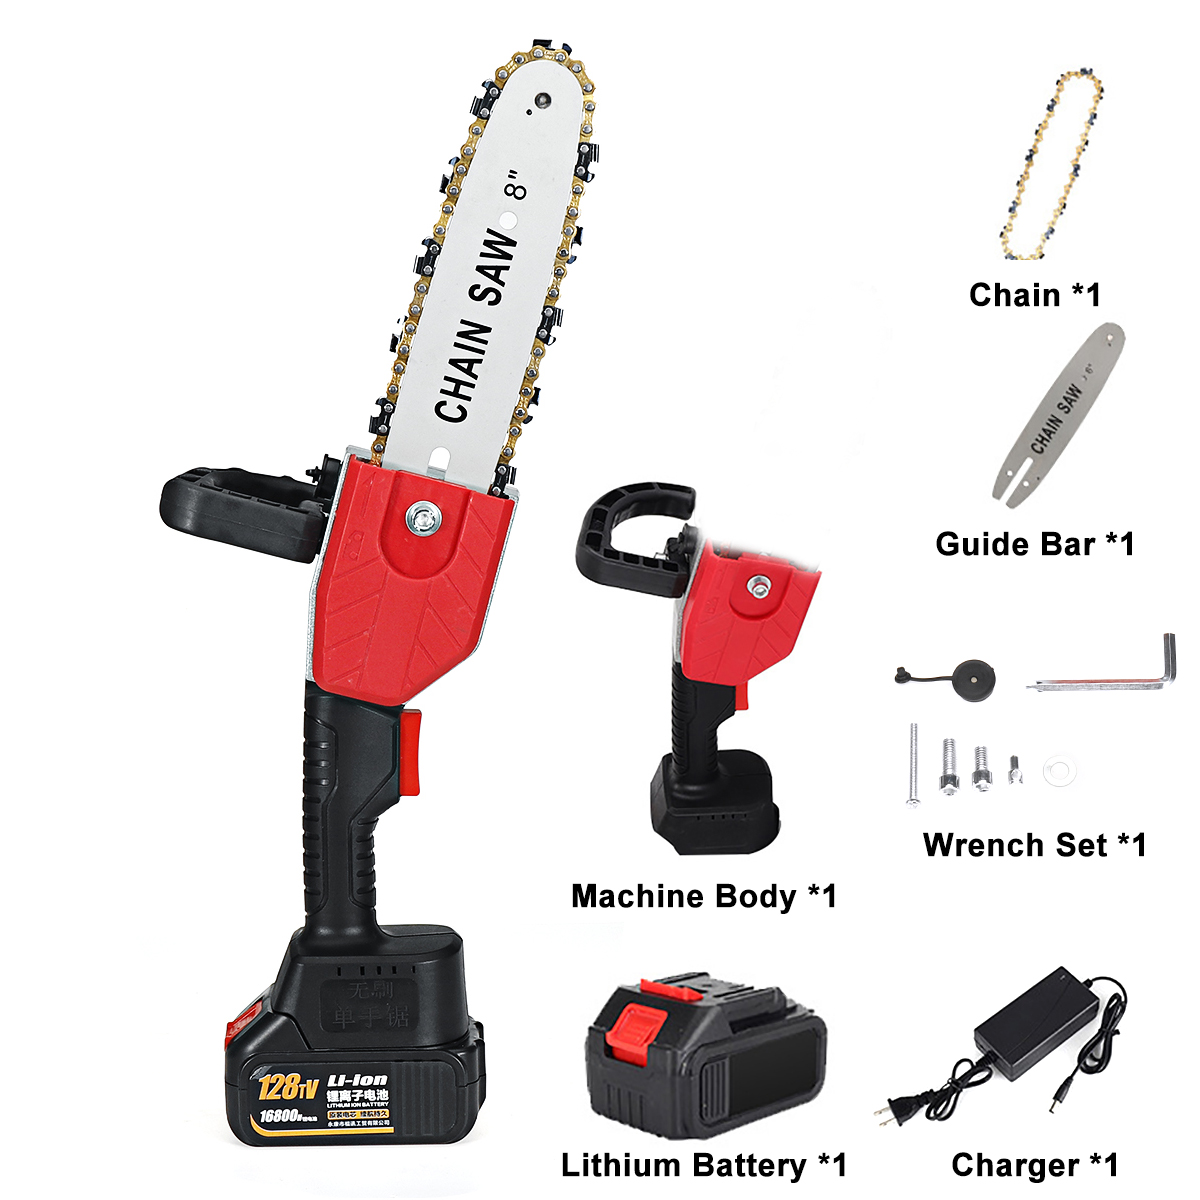 Mini-Chainsaw-8-Inch-21V-Portable-Brushless-Cordless-Electric-Chain-Saw-Handheld-Pruning-Shears-Chai-1795044-17